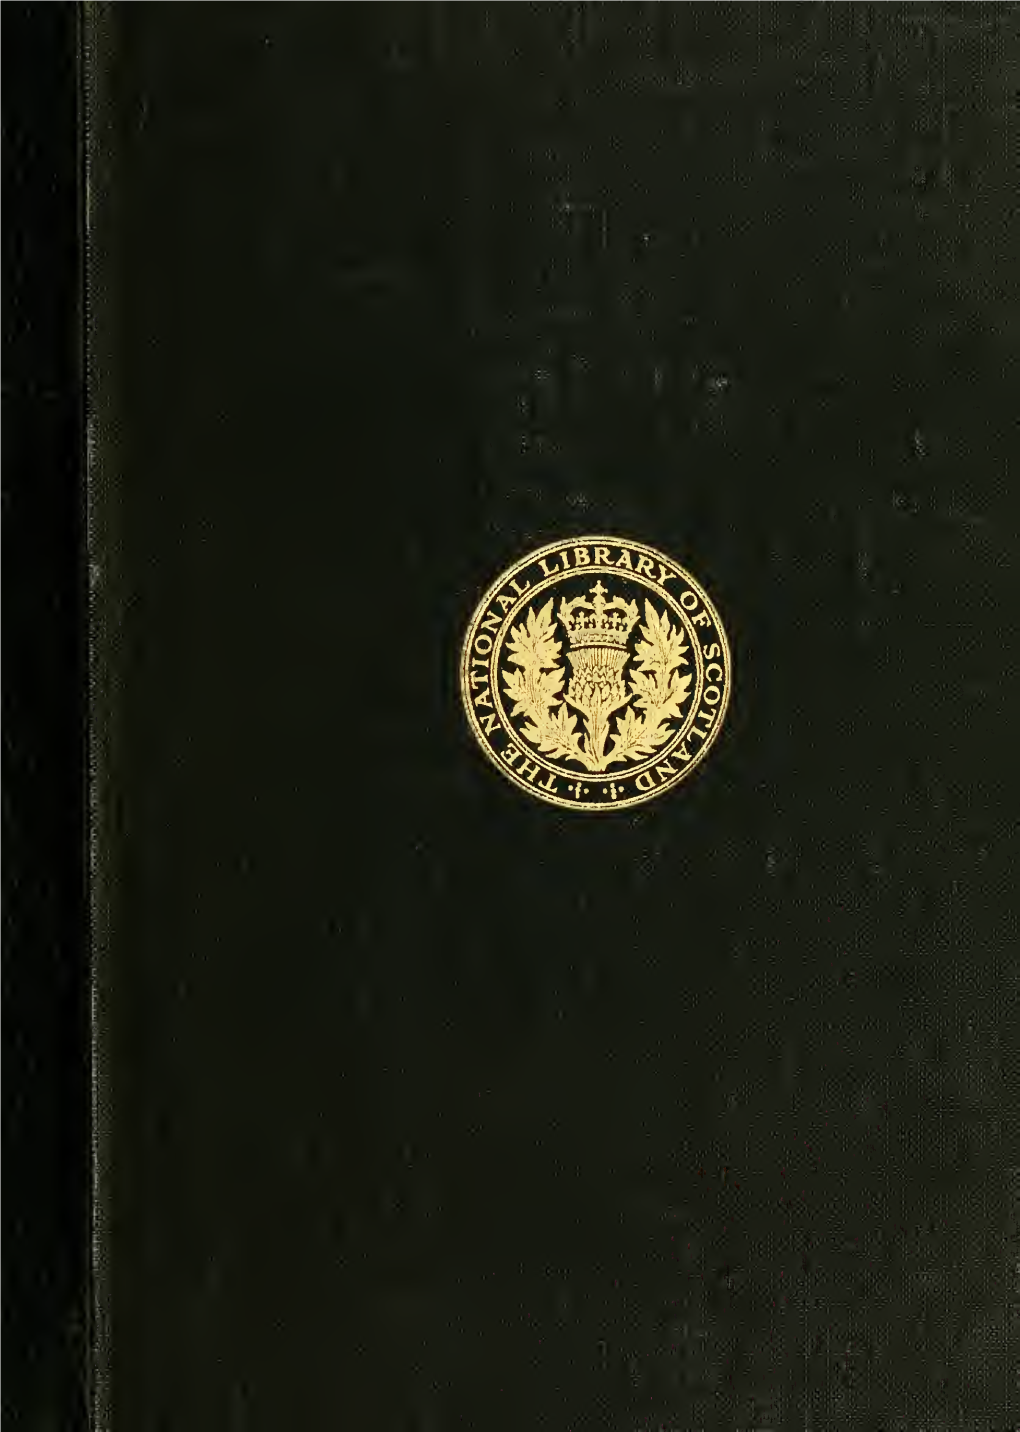 Miscellany of the Maitland Club, Consisting of Original Papers And